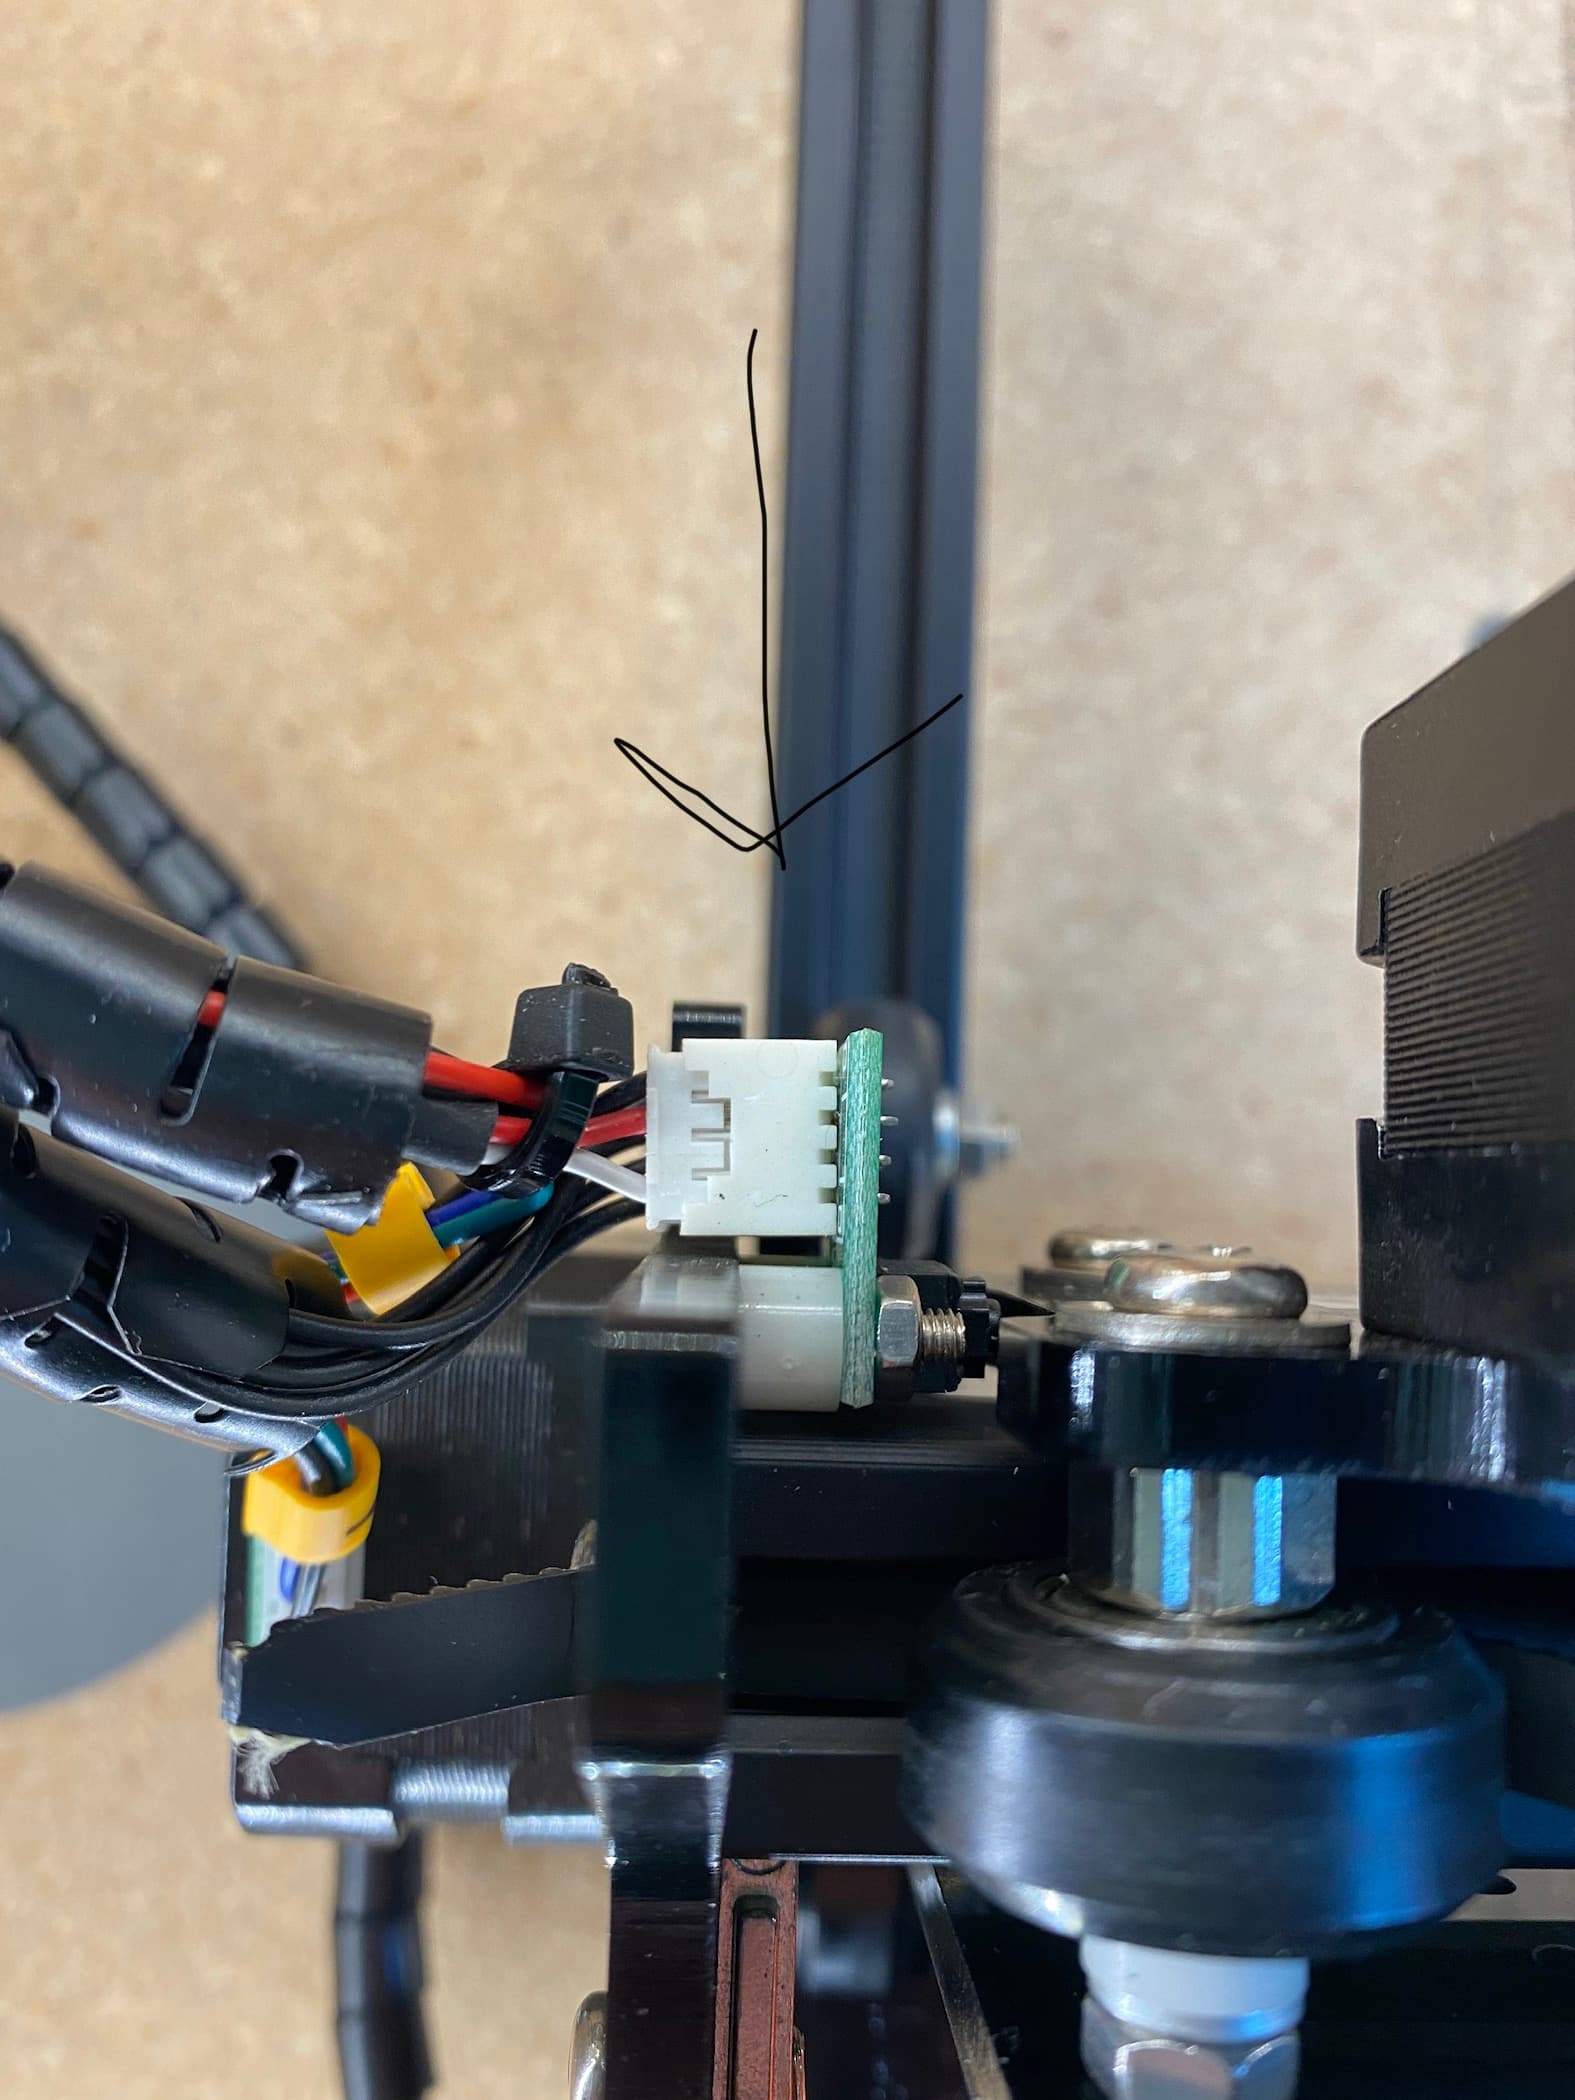 Ortur Laser Master 3 Troubleshooting: Issues and Fixes – GearBerry